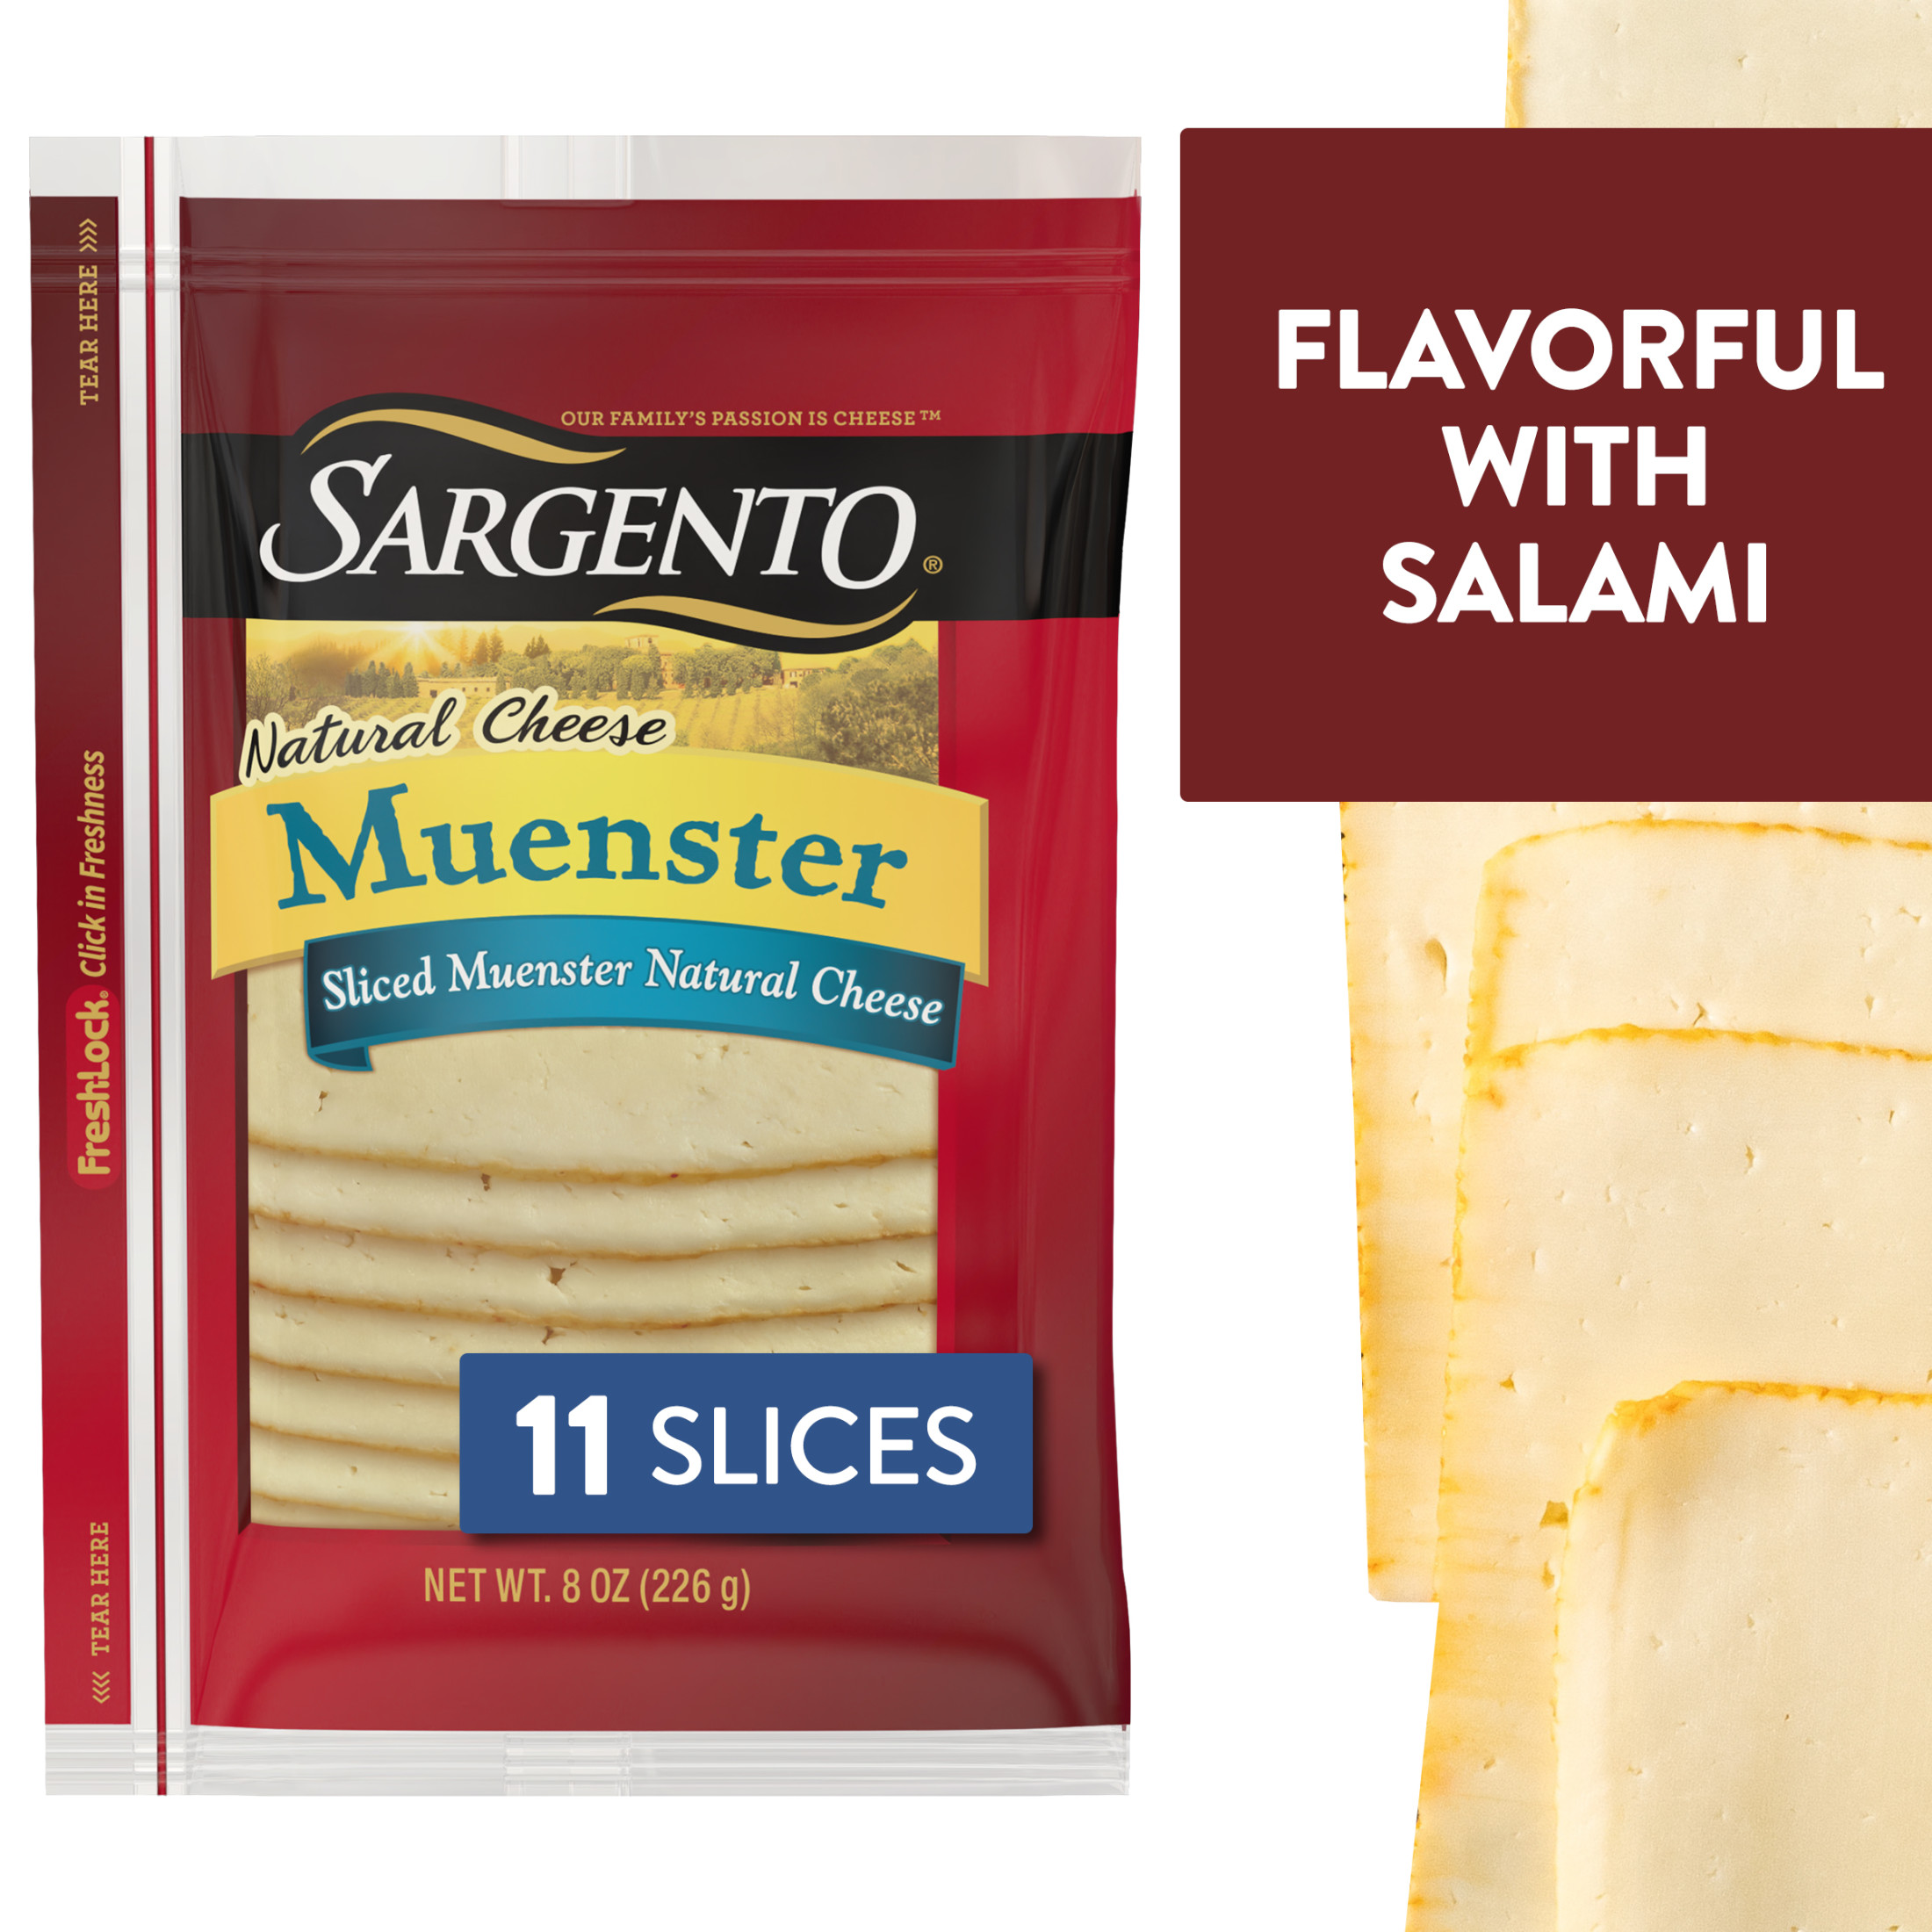 Sargento® Sliced Muenster Natural Cheese, 11 Slices - image 1 of 6